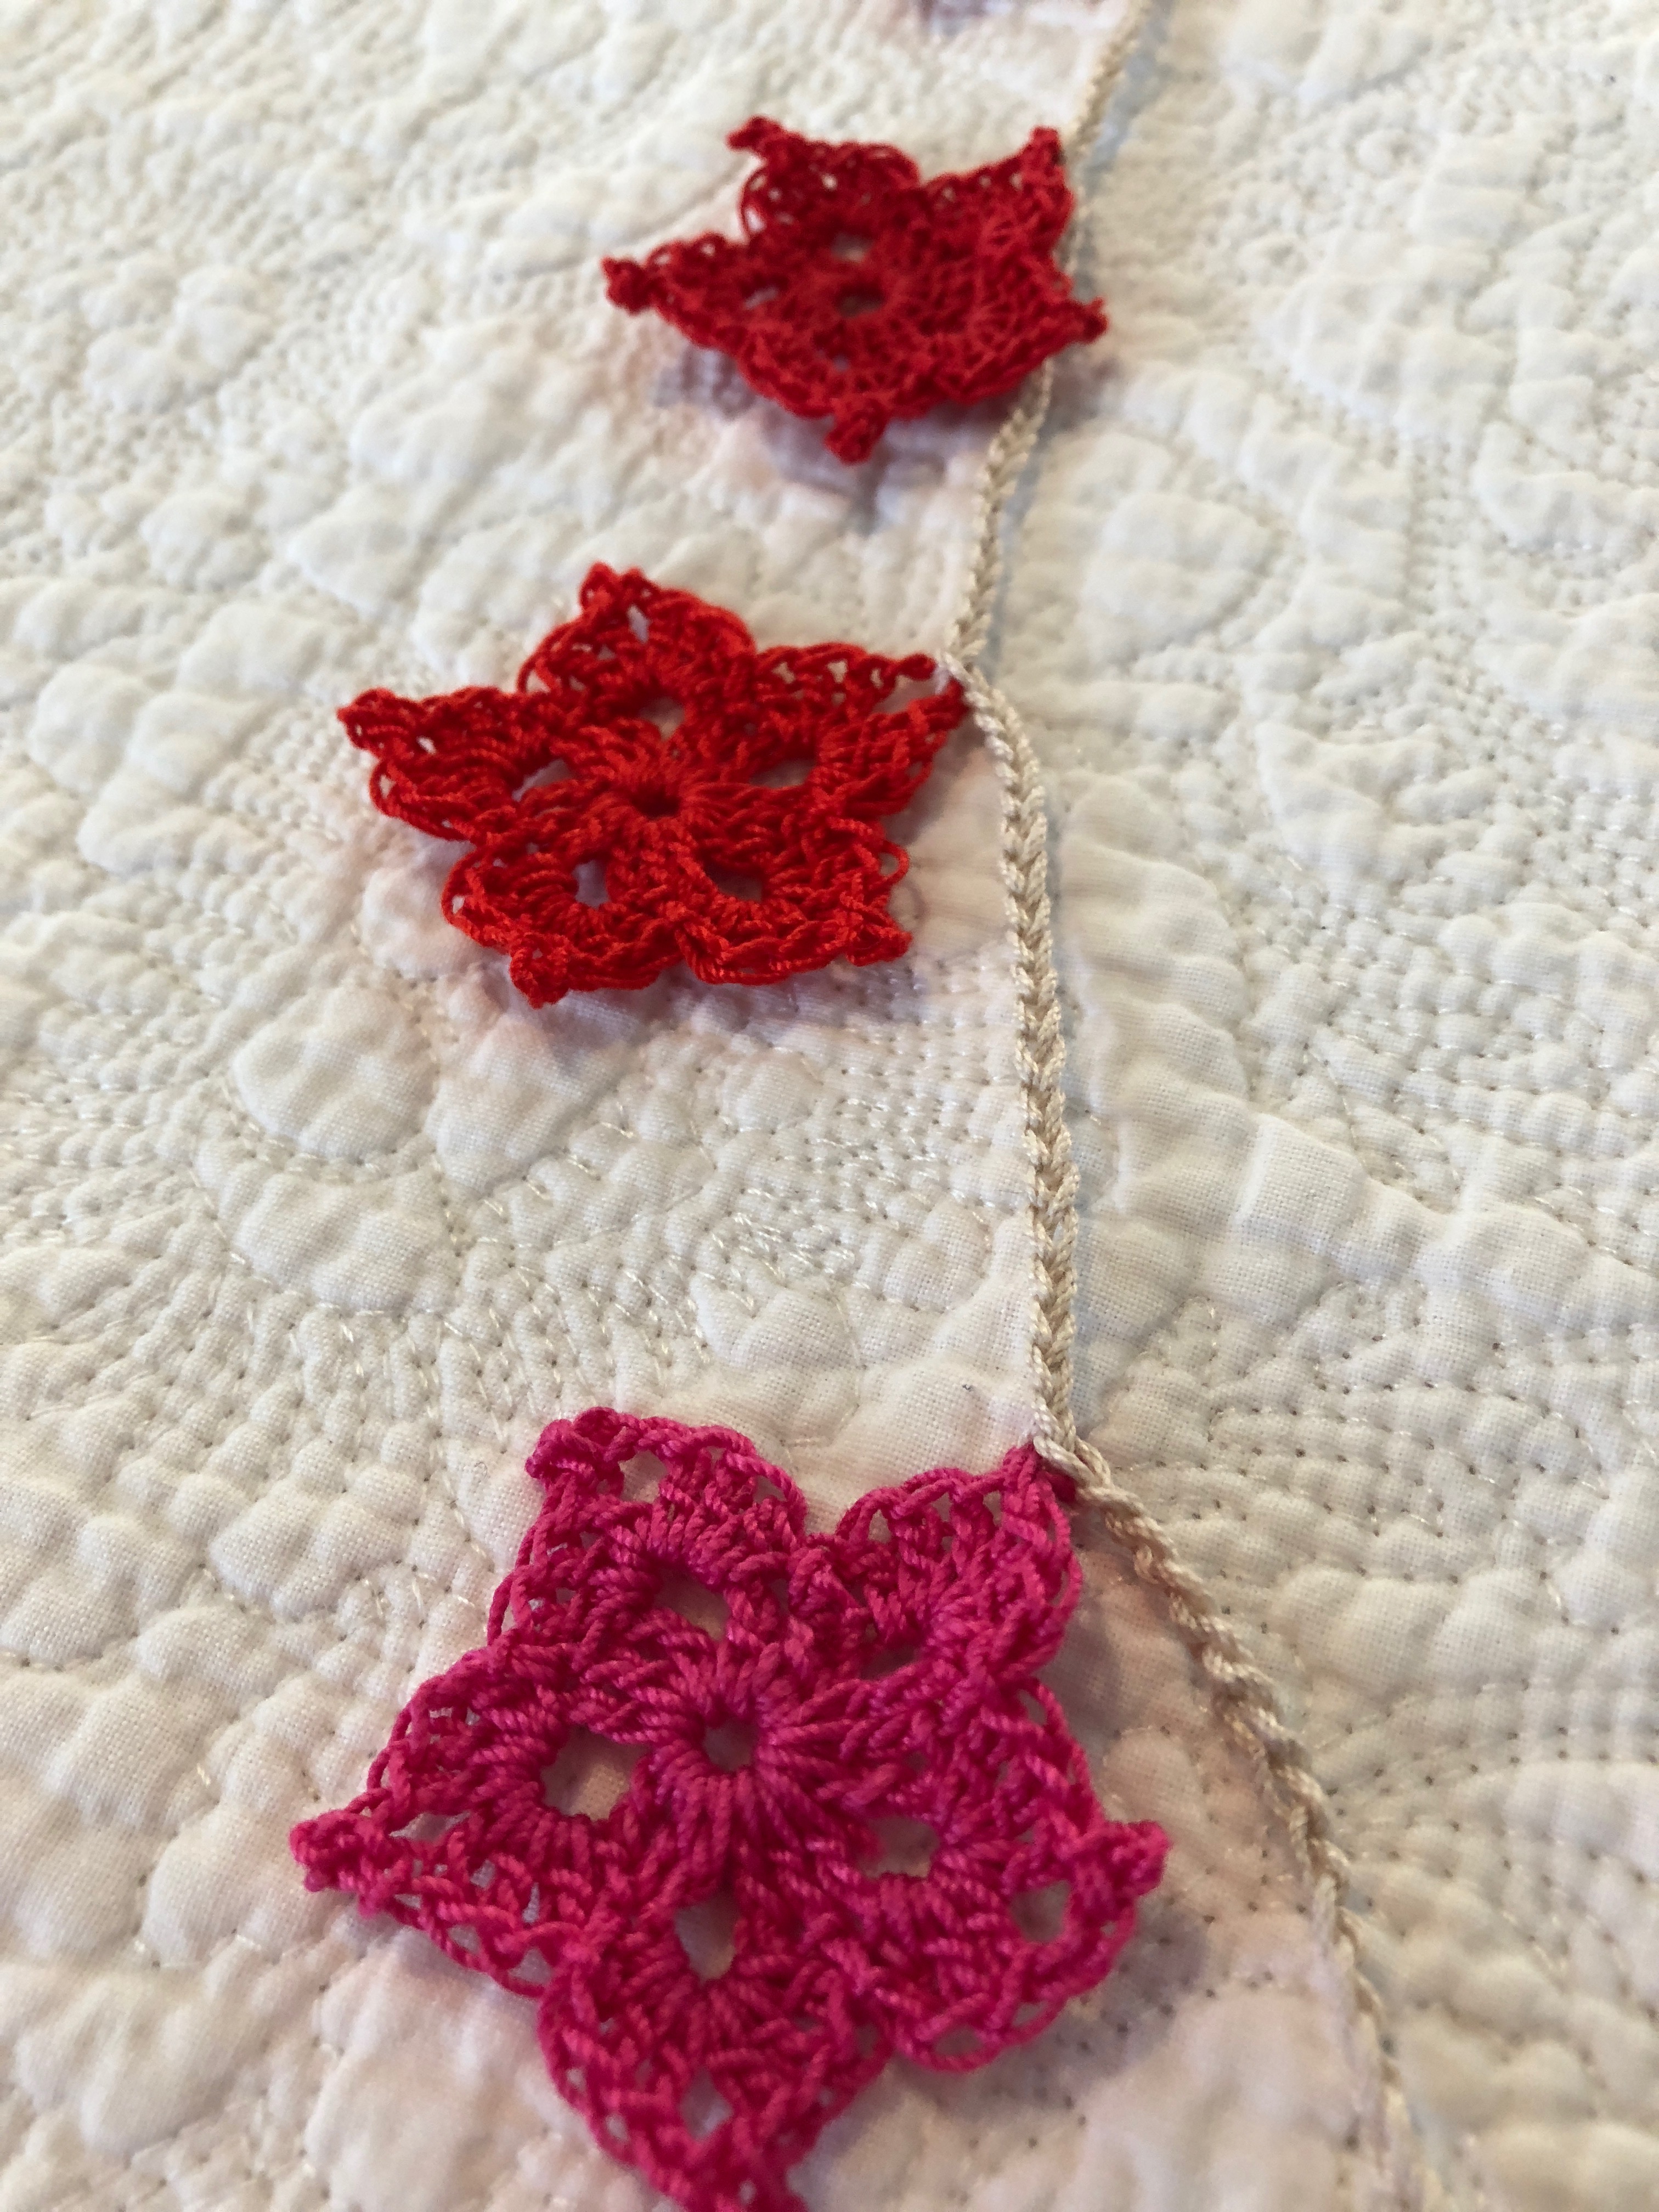 Hand made, crocheted, vintage style, cotton star garland in a gradient of red to purple shades.